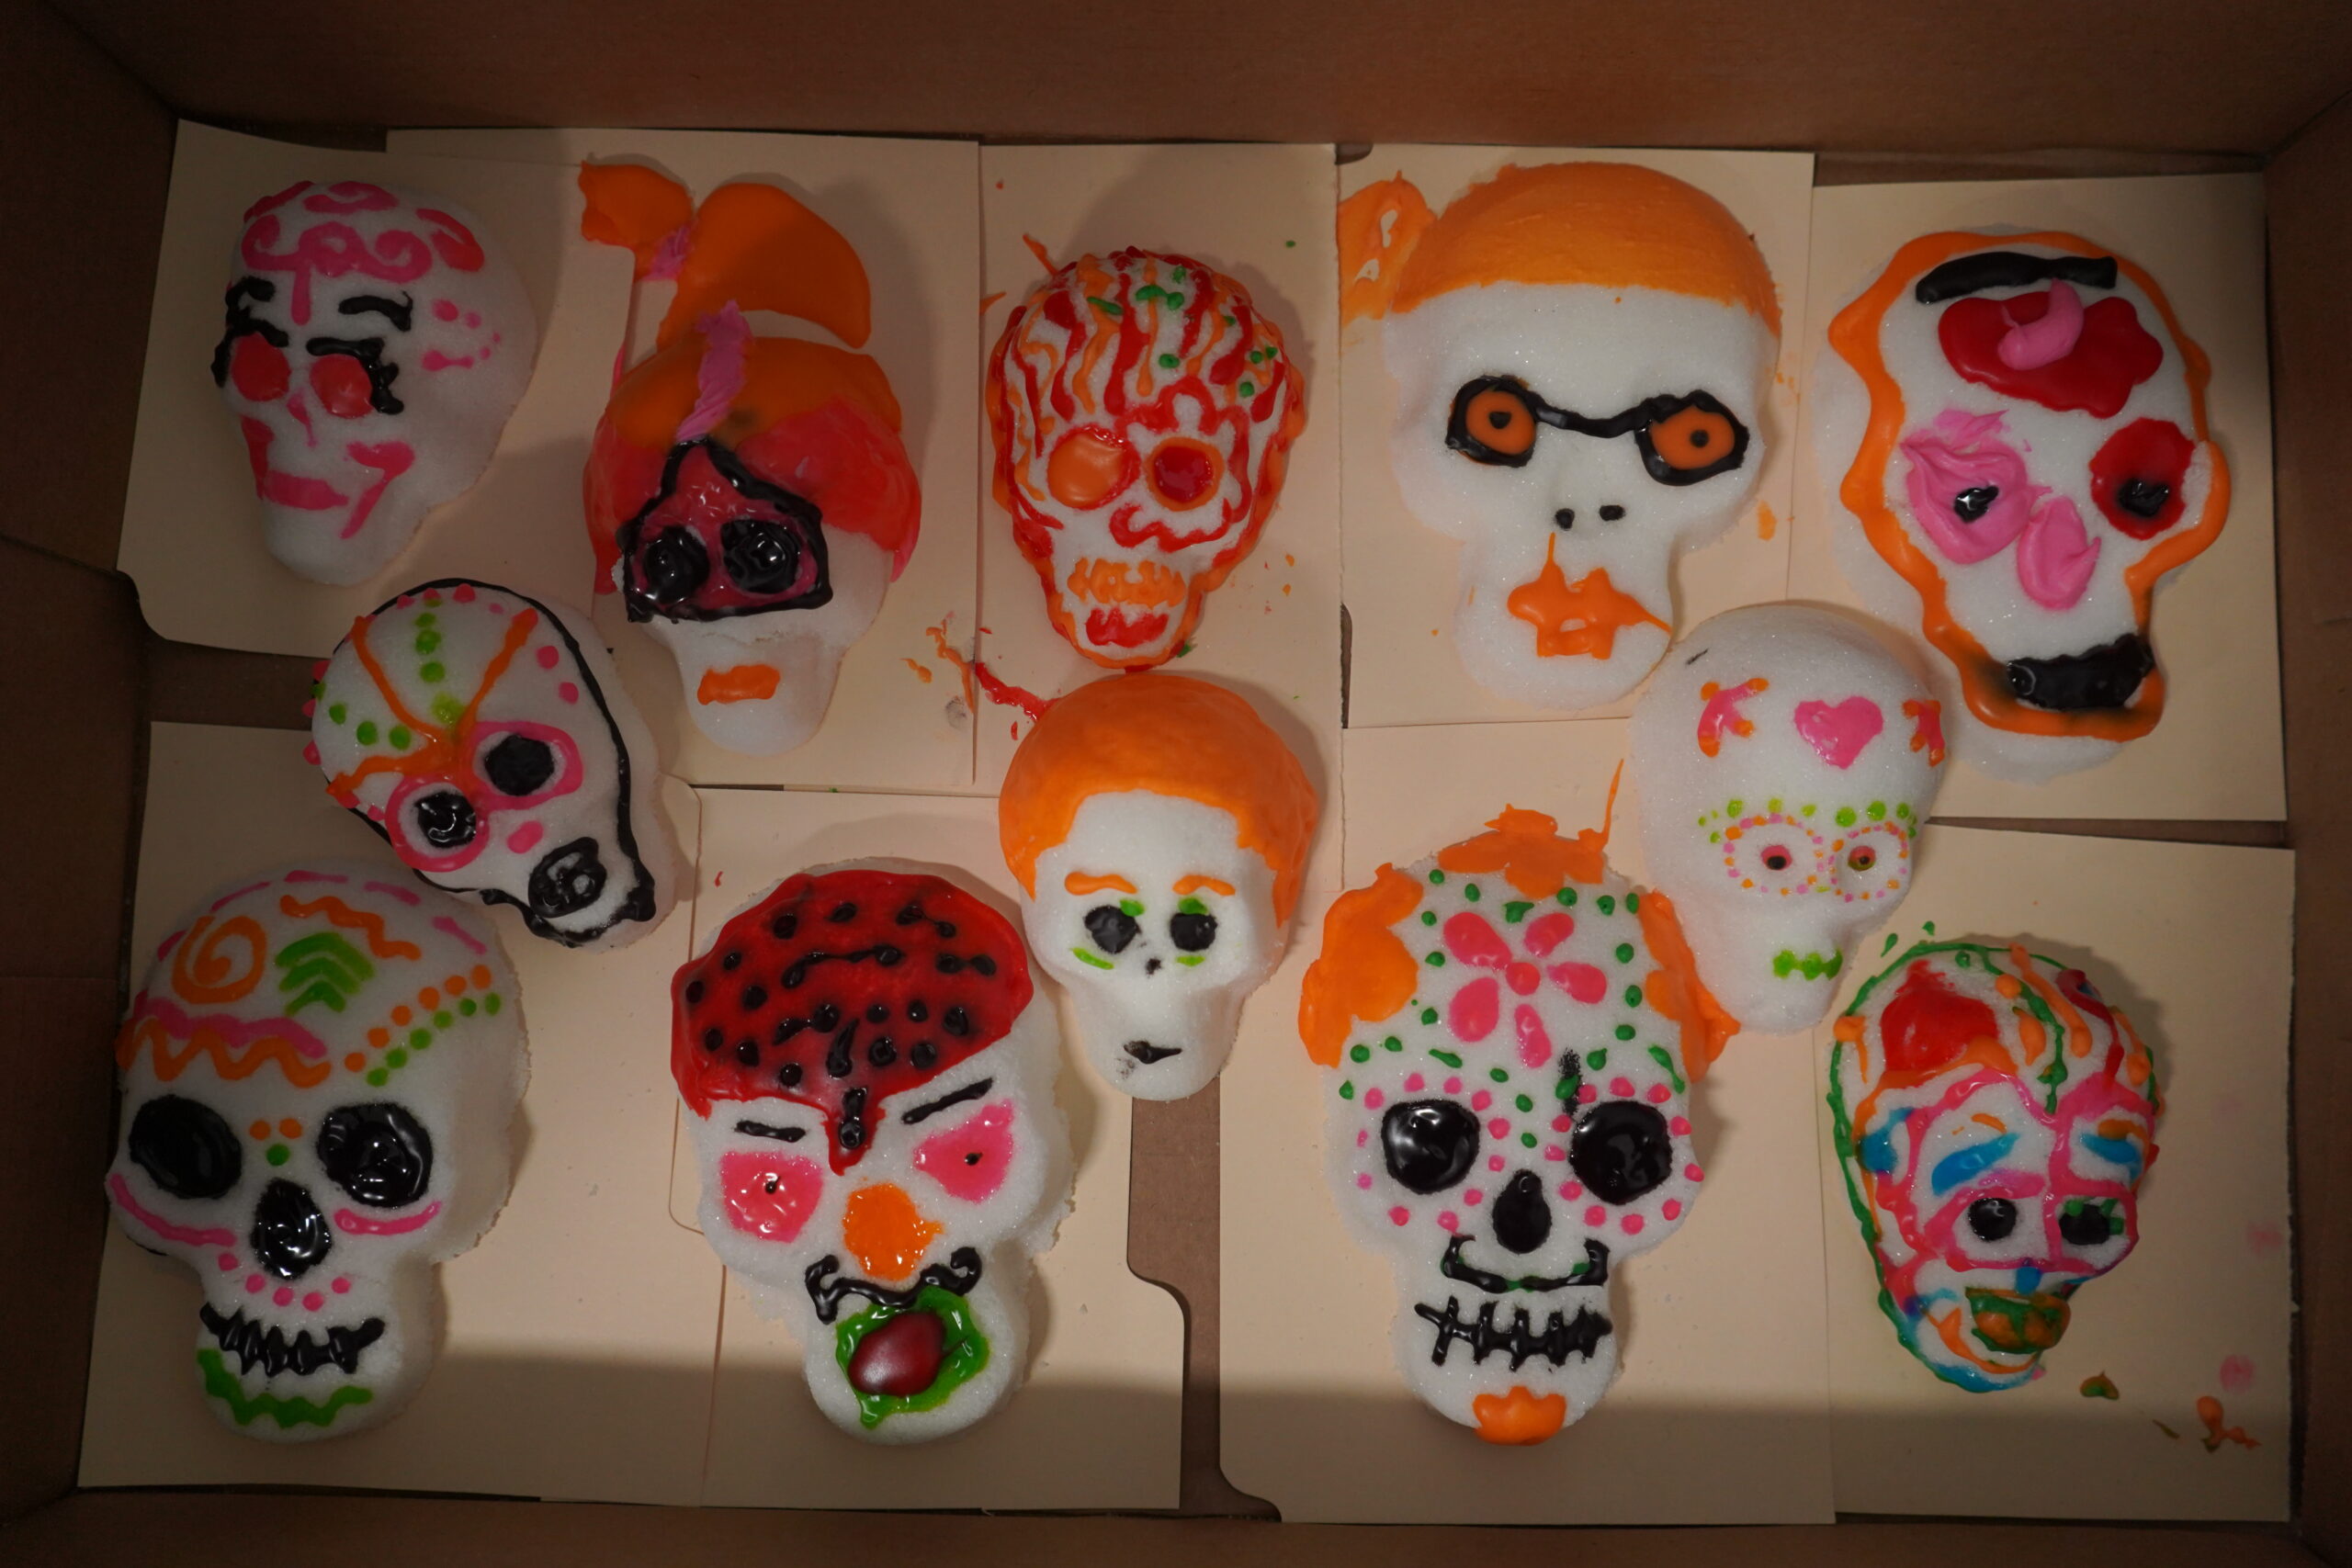 Celebrating Day of the Dead at Derryfield